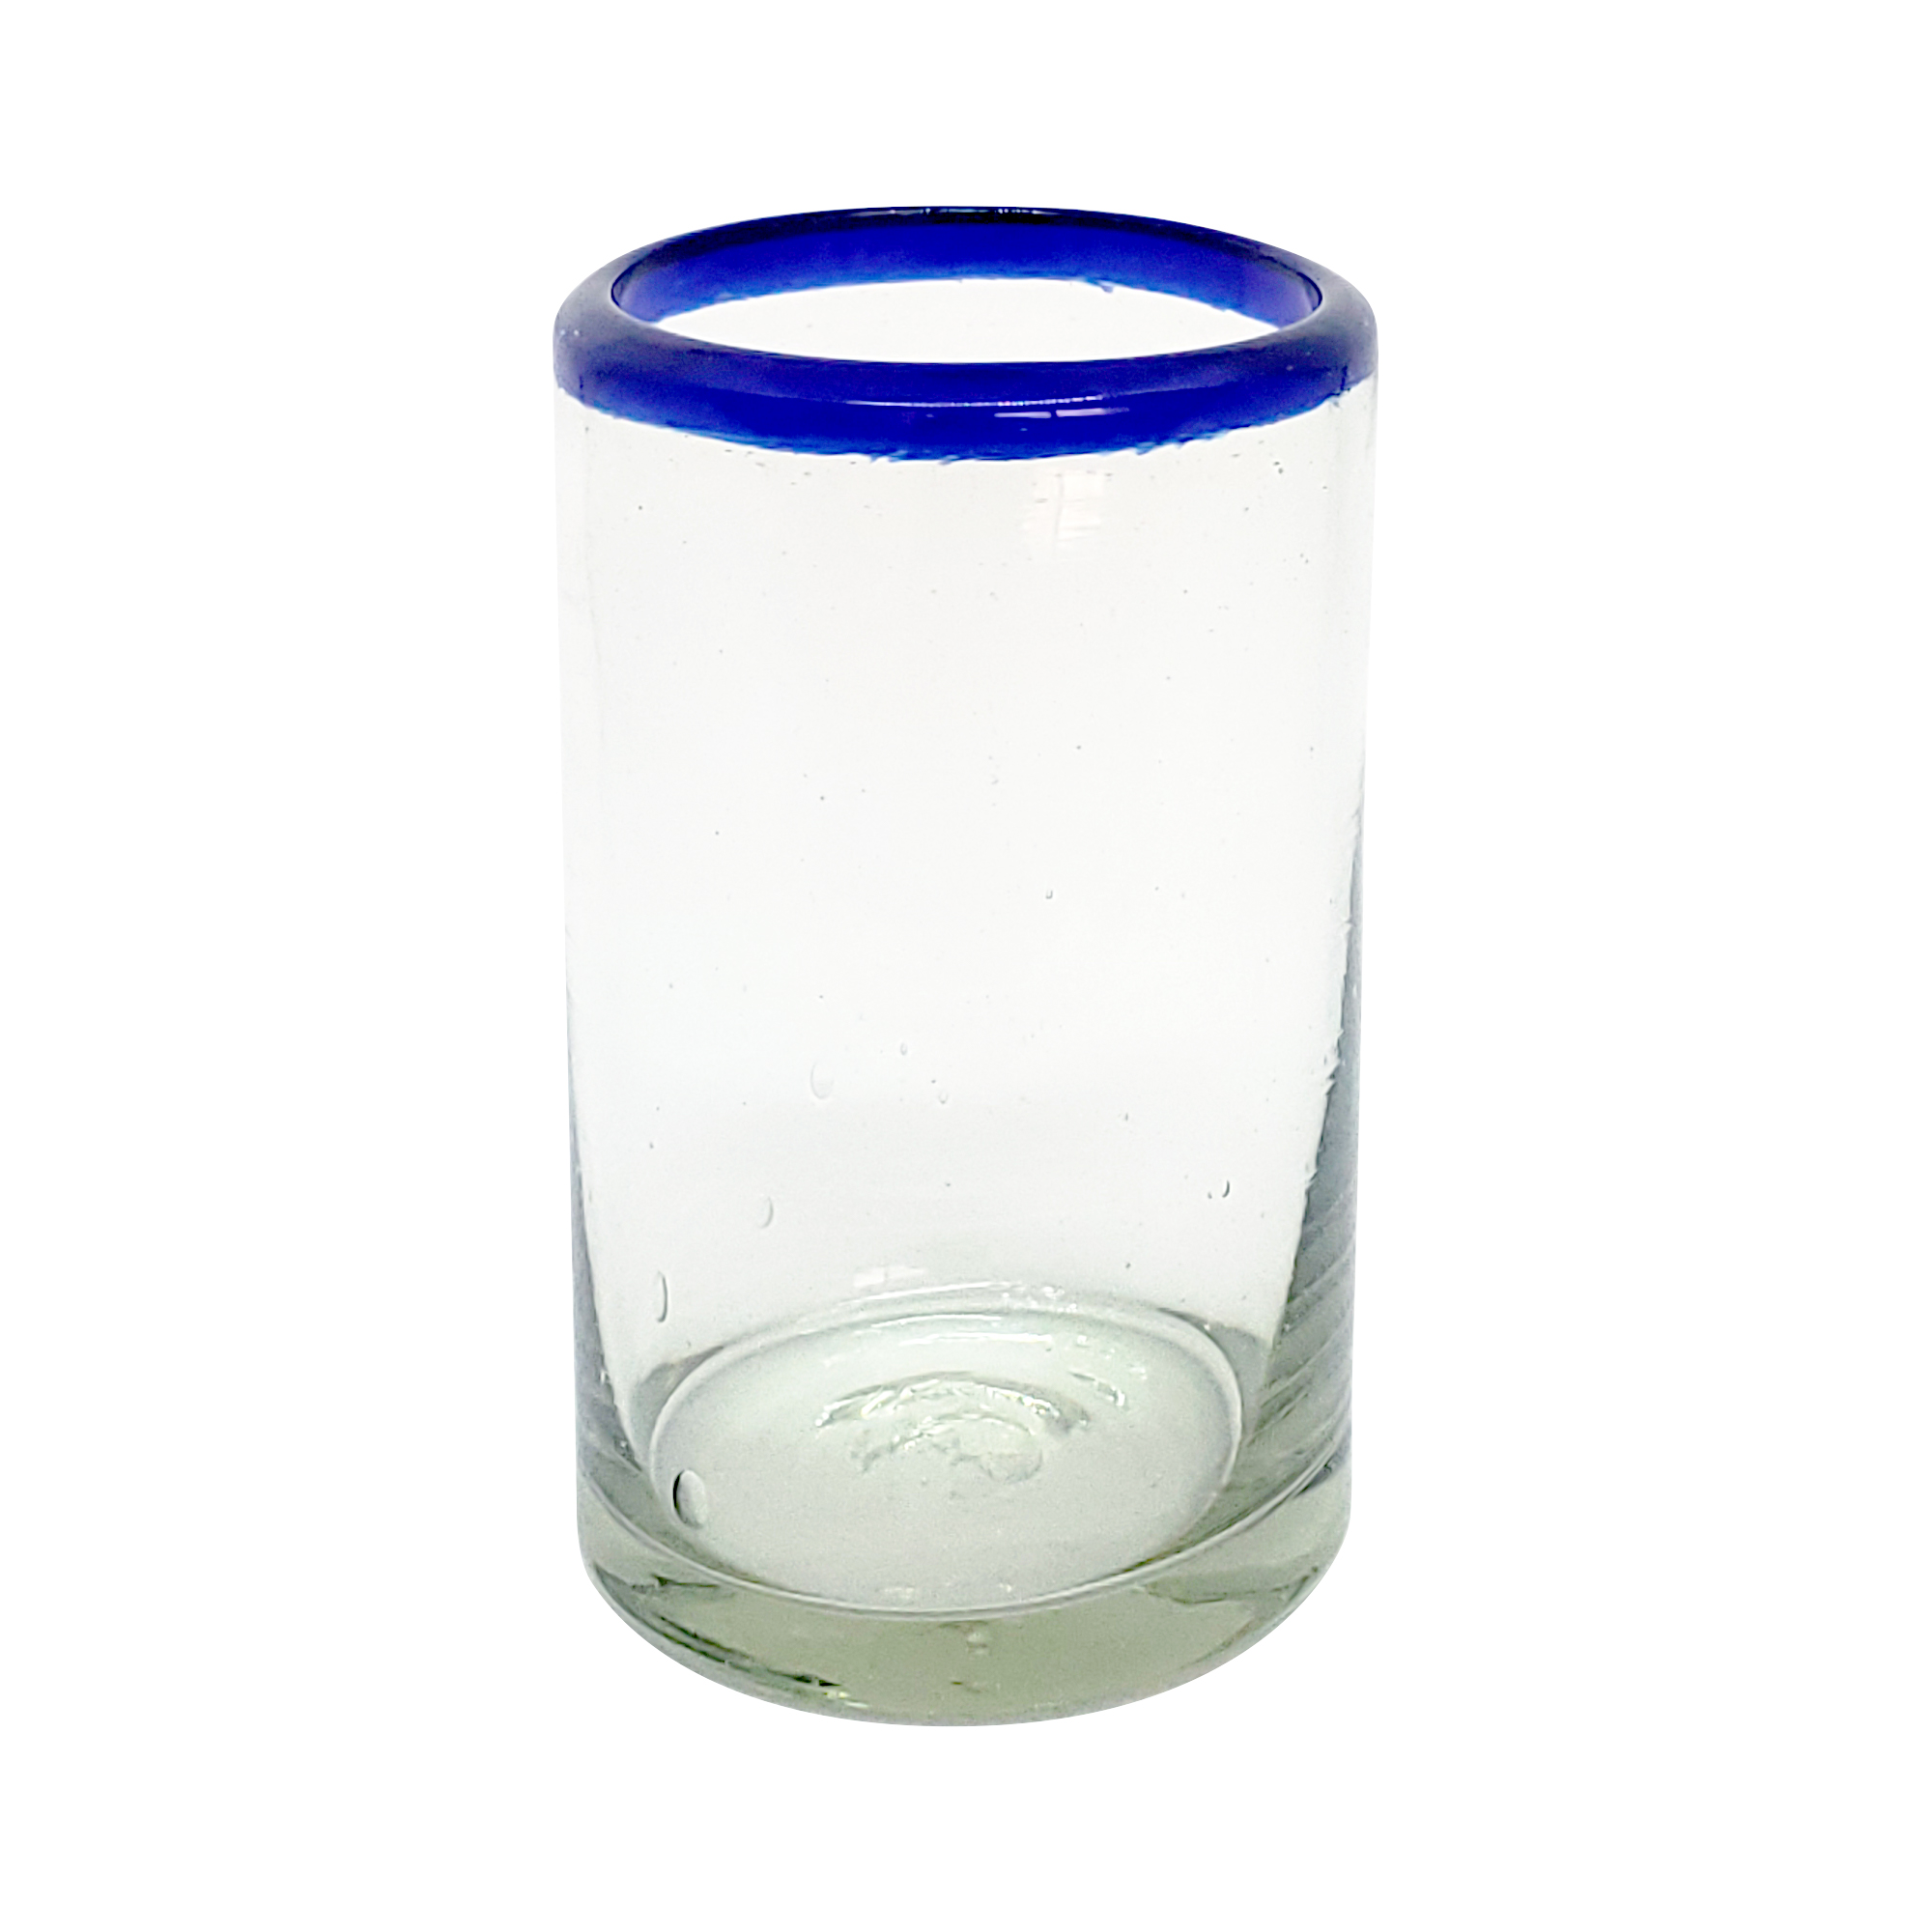 Sale Items / Cobalt Blue Rim 9 oz Juice Glasses (set of 6) / For those who enjoy fresh squeezed fruit juice in the morning, these small glasses are just the right size. Made from authentic recycled glass.